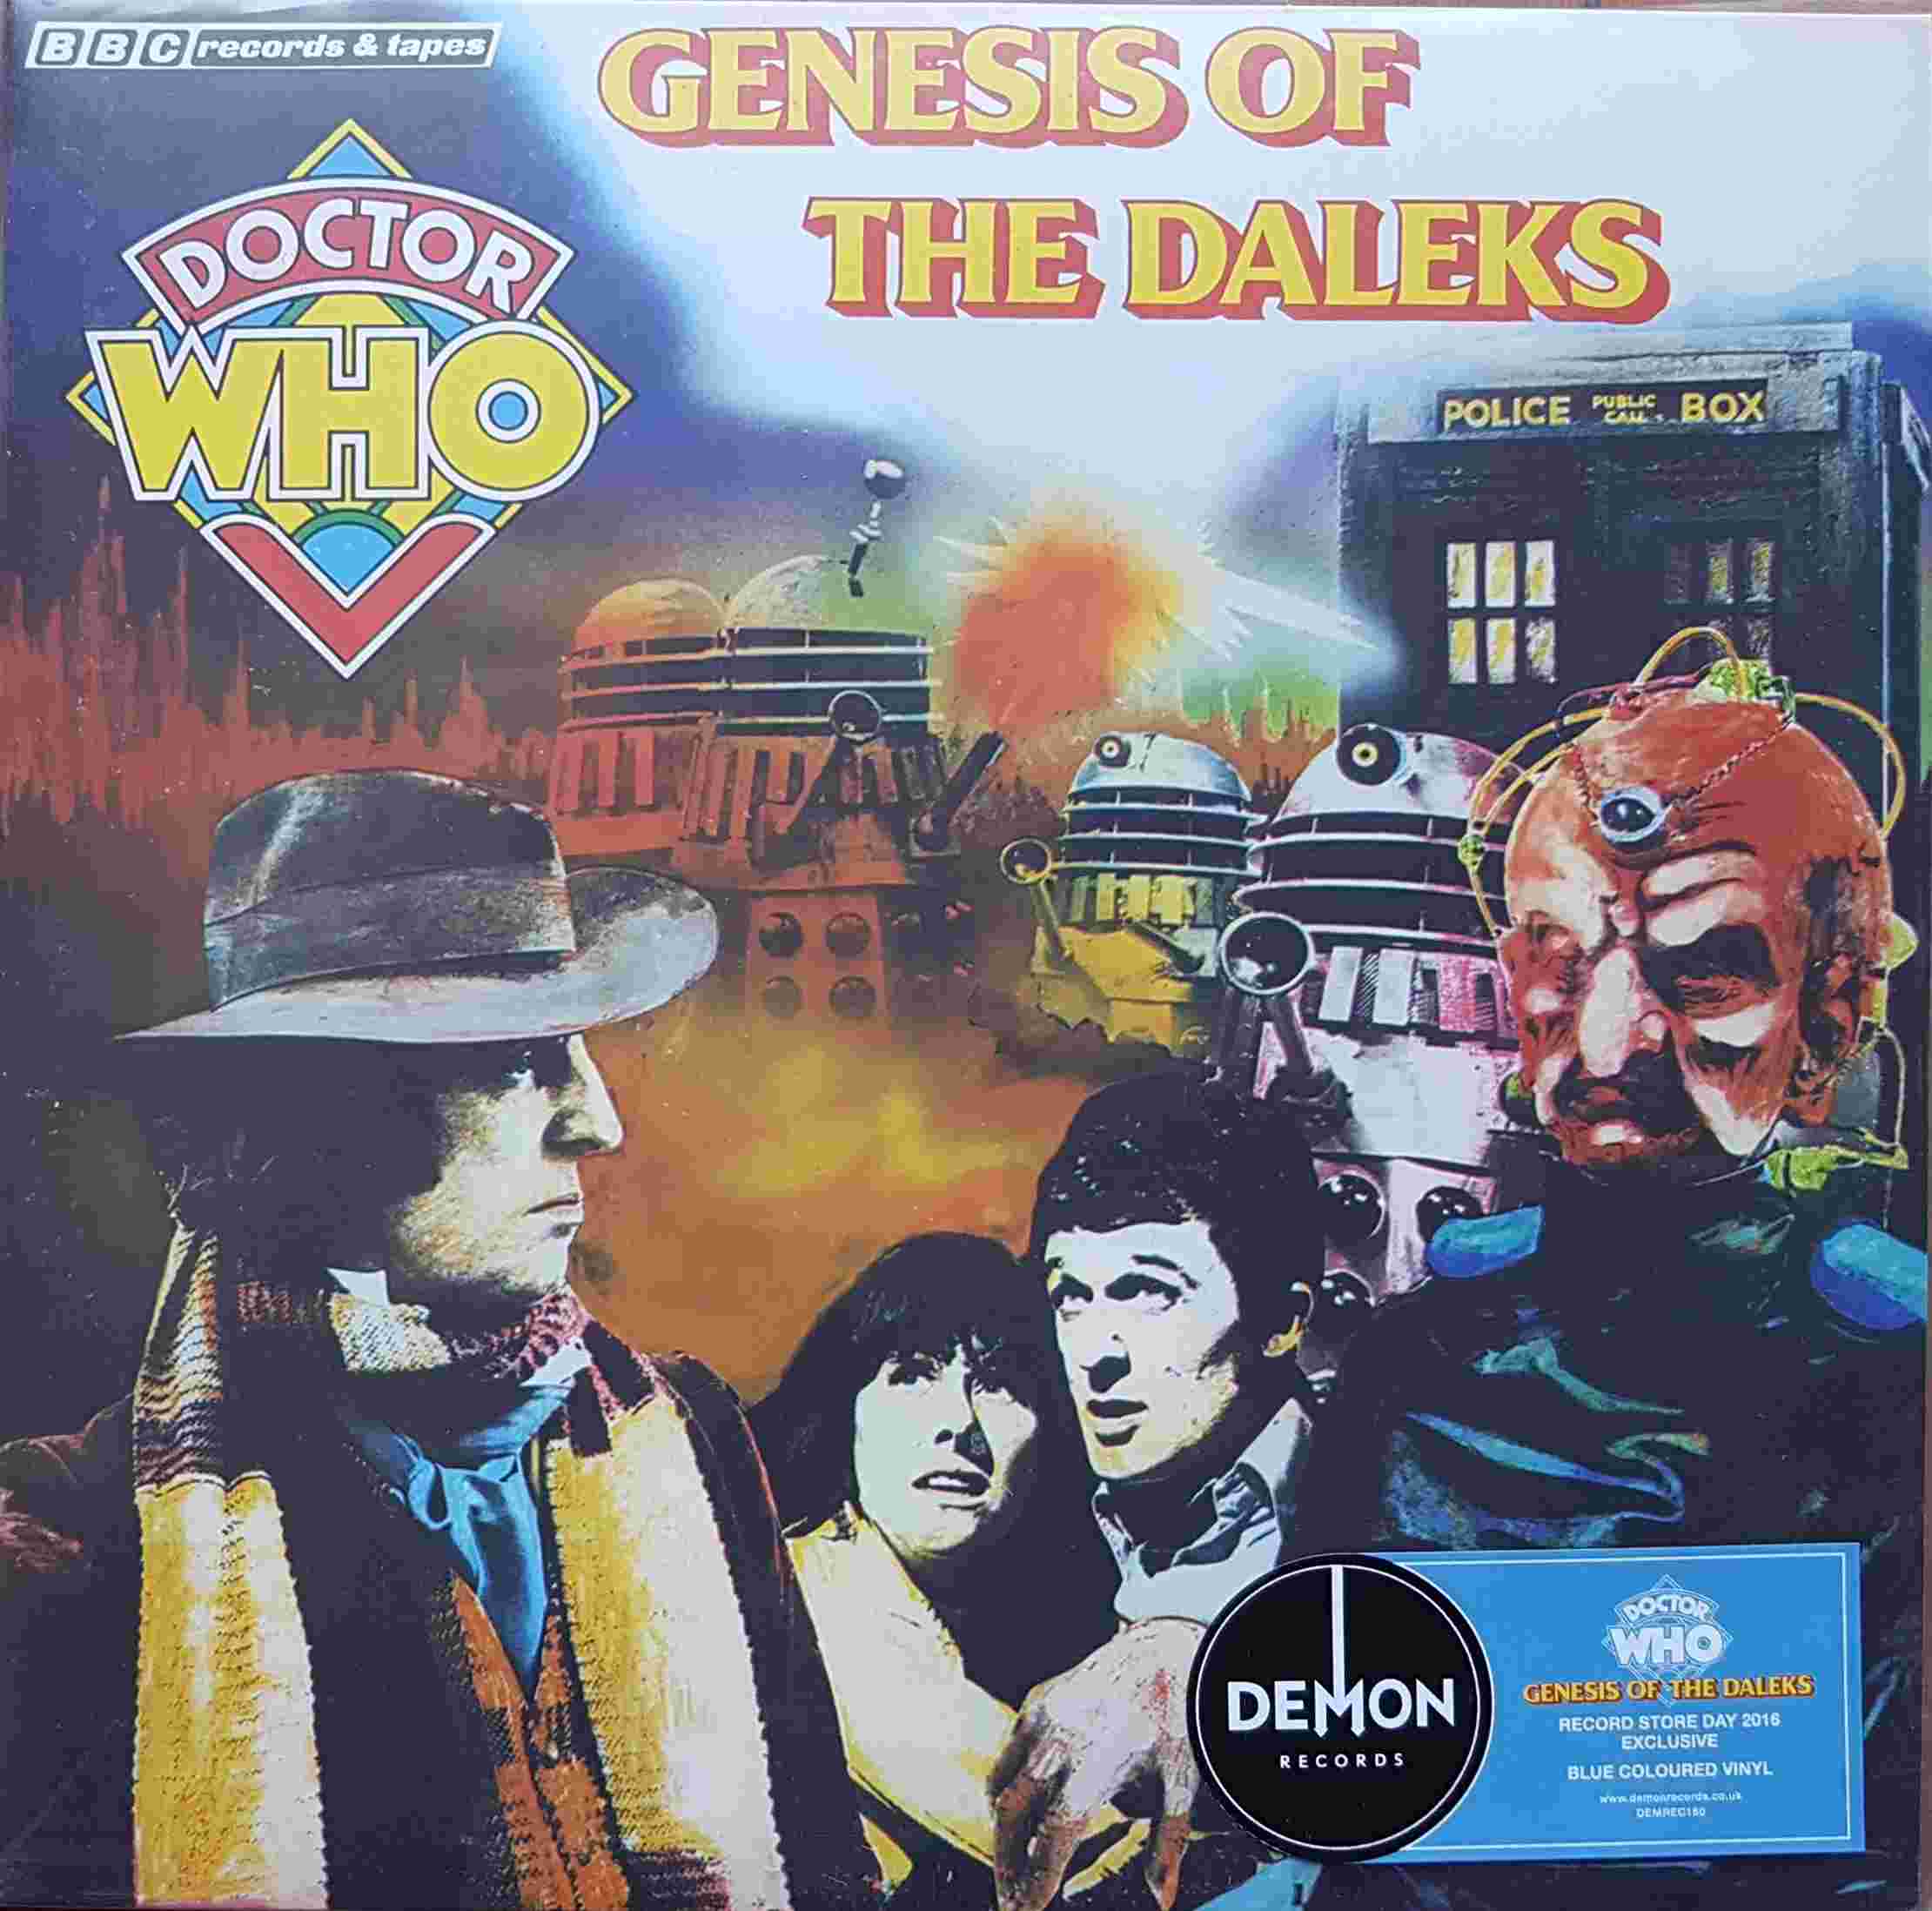 Picture of Doctor Who - Genesis of the Daleks - Record Store Day 2016 by artist Terry Nation from the BBC albums - Records and Tapes library